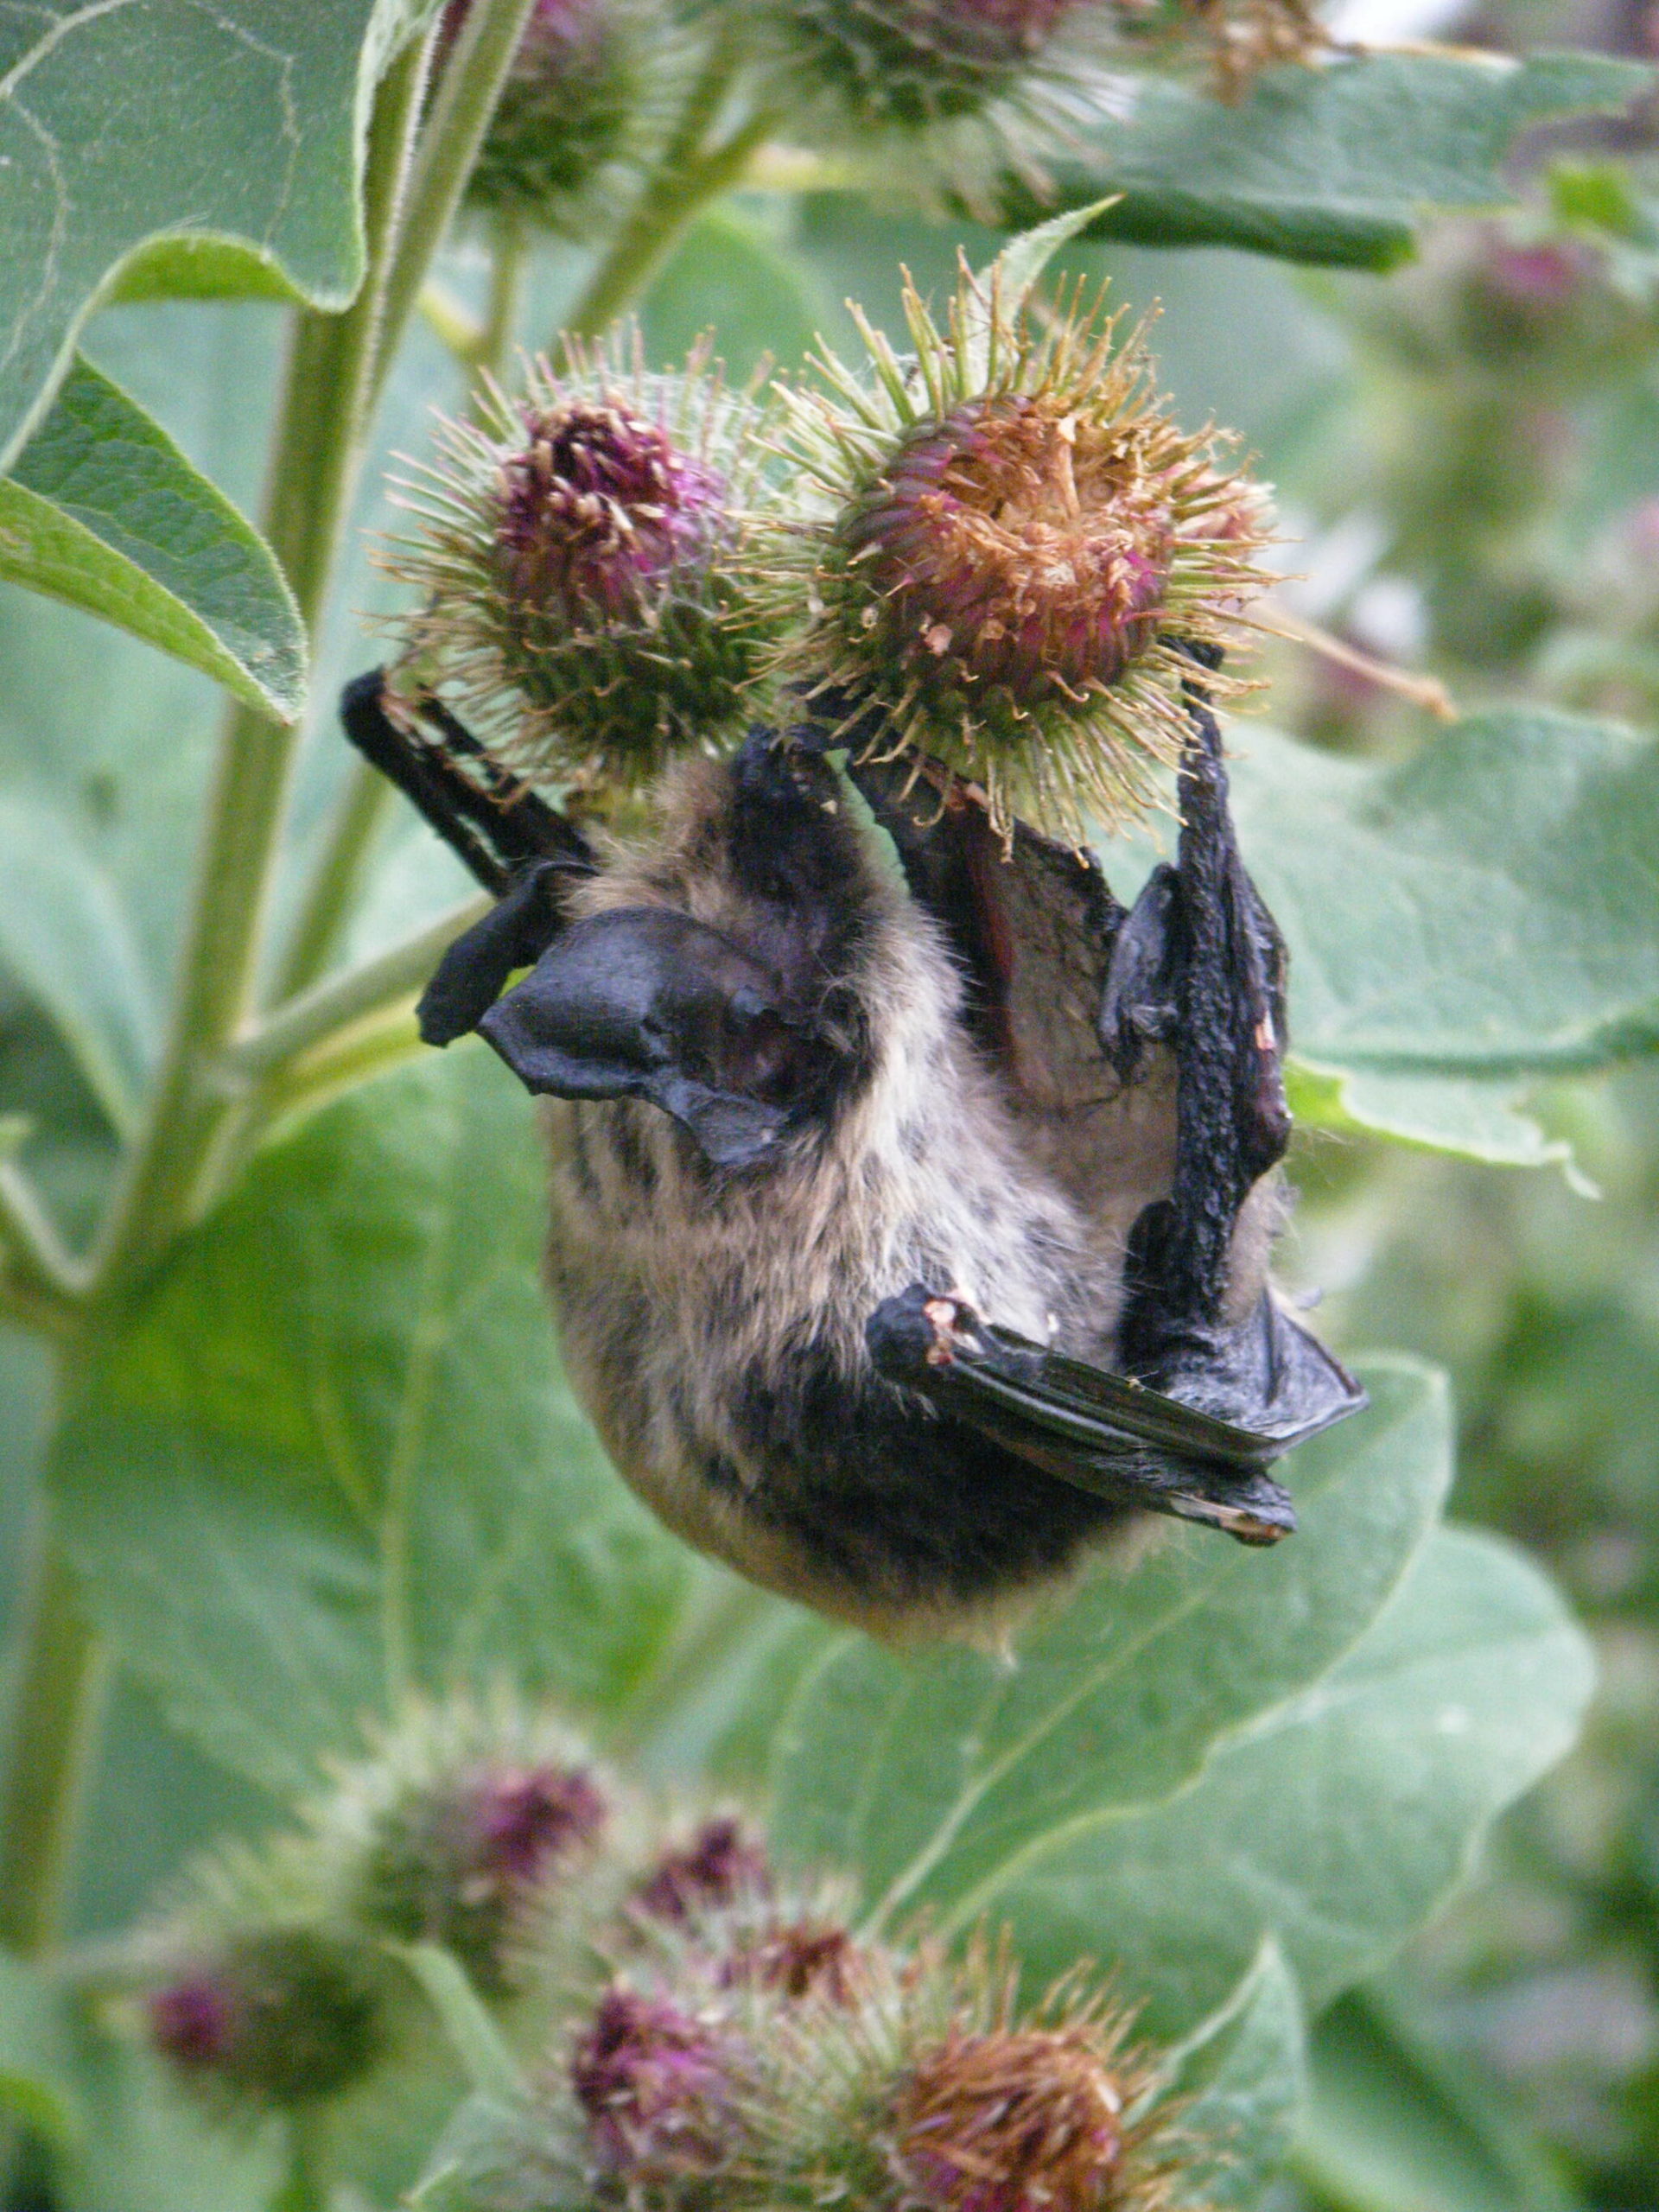 Removing invasive plants such as burdock allows native plants to thrive and reduces hazards for bats. Photo courtesy of M Anion.